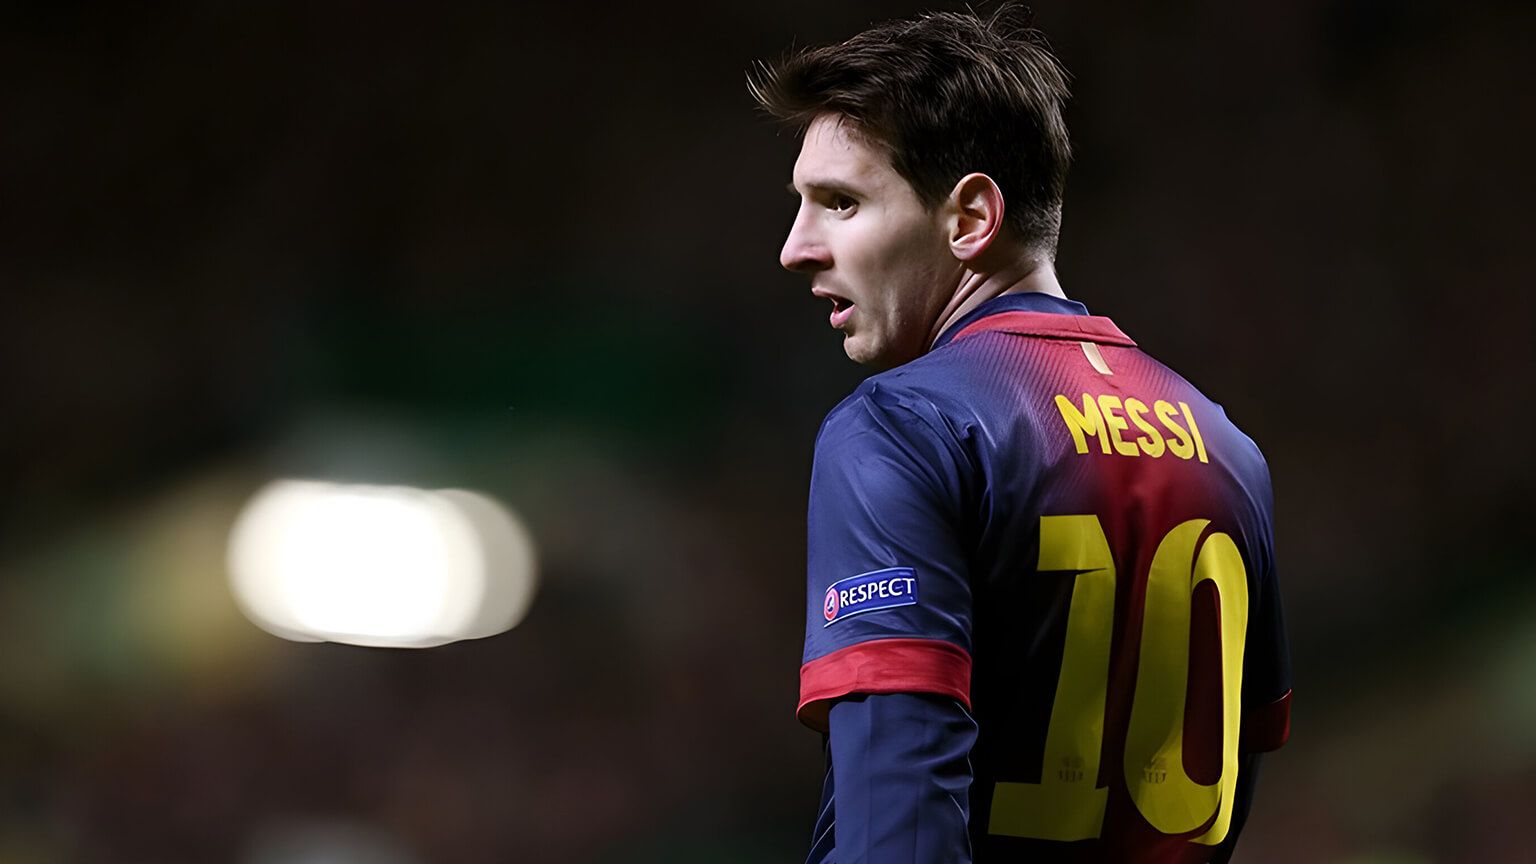 Lionel Messi, the Argentine soccer player, is the highest-paid athlete in the world. - Messi